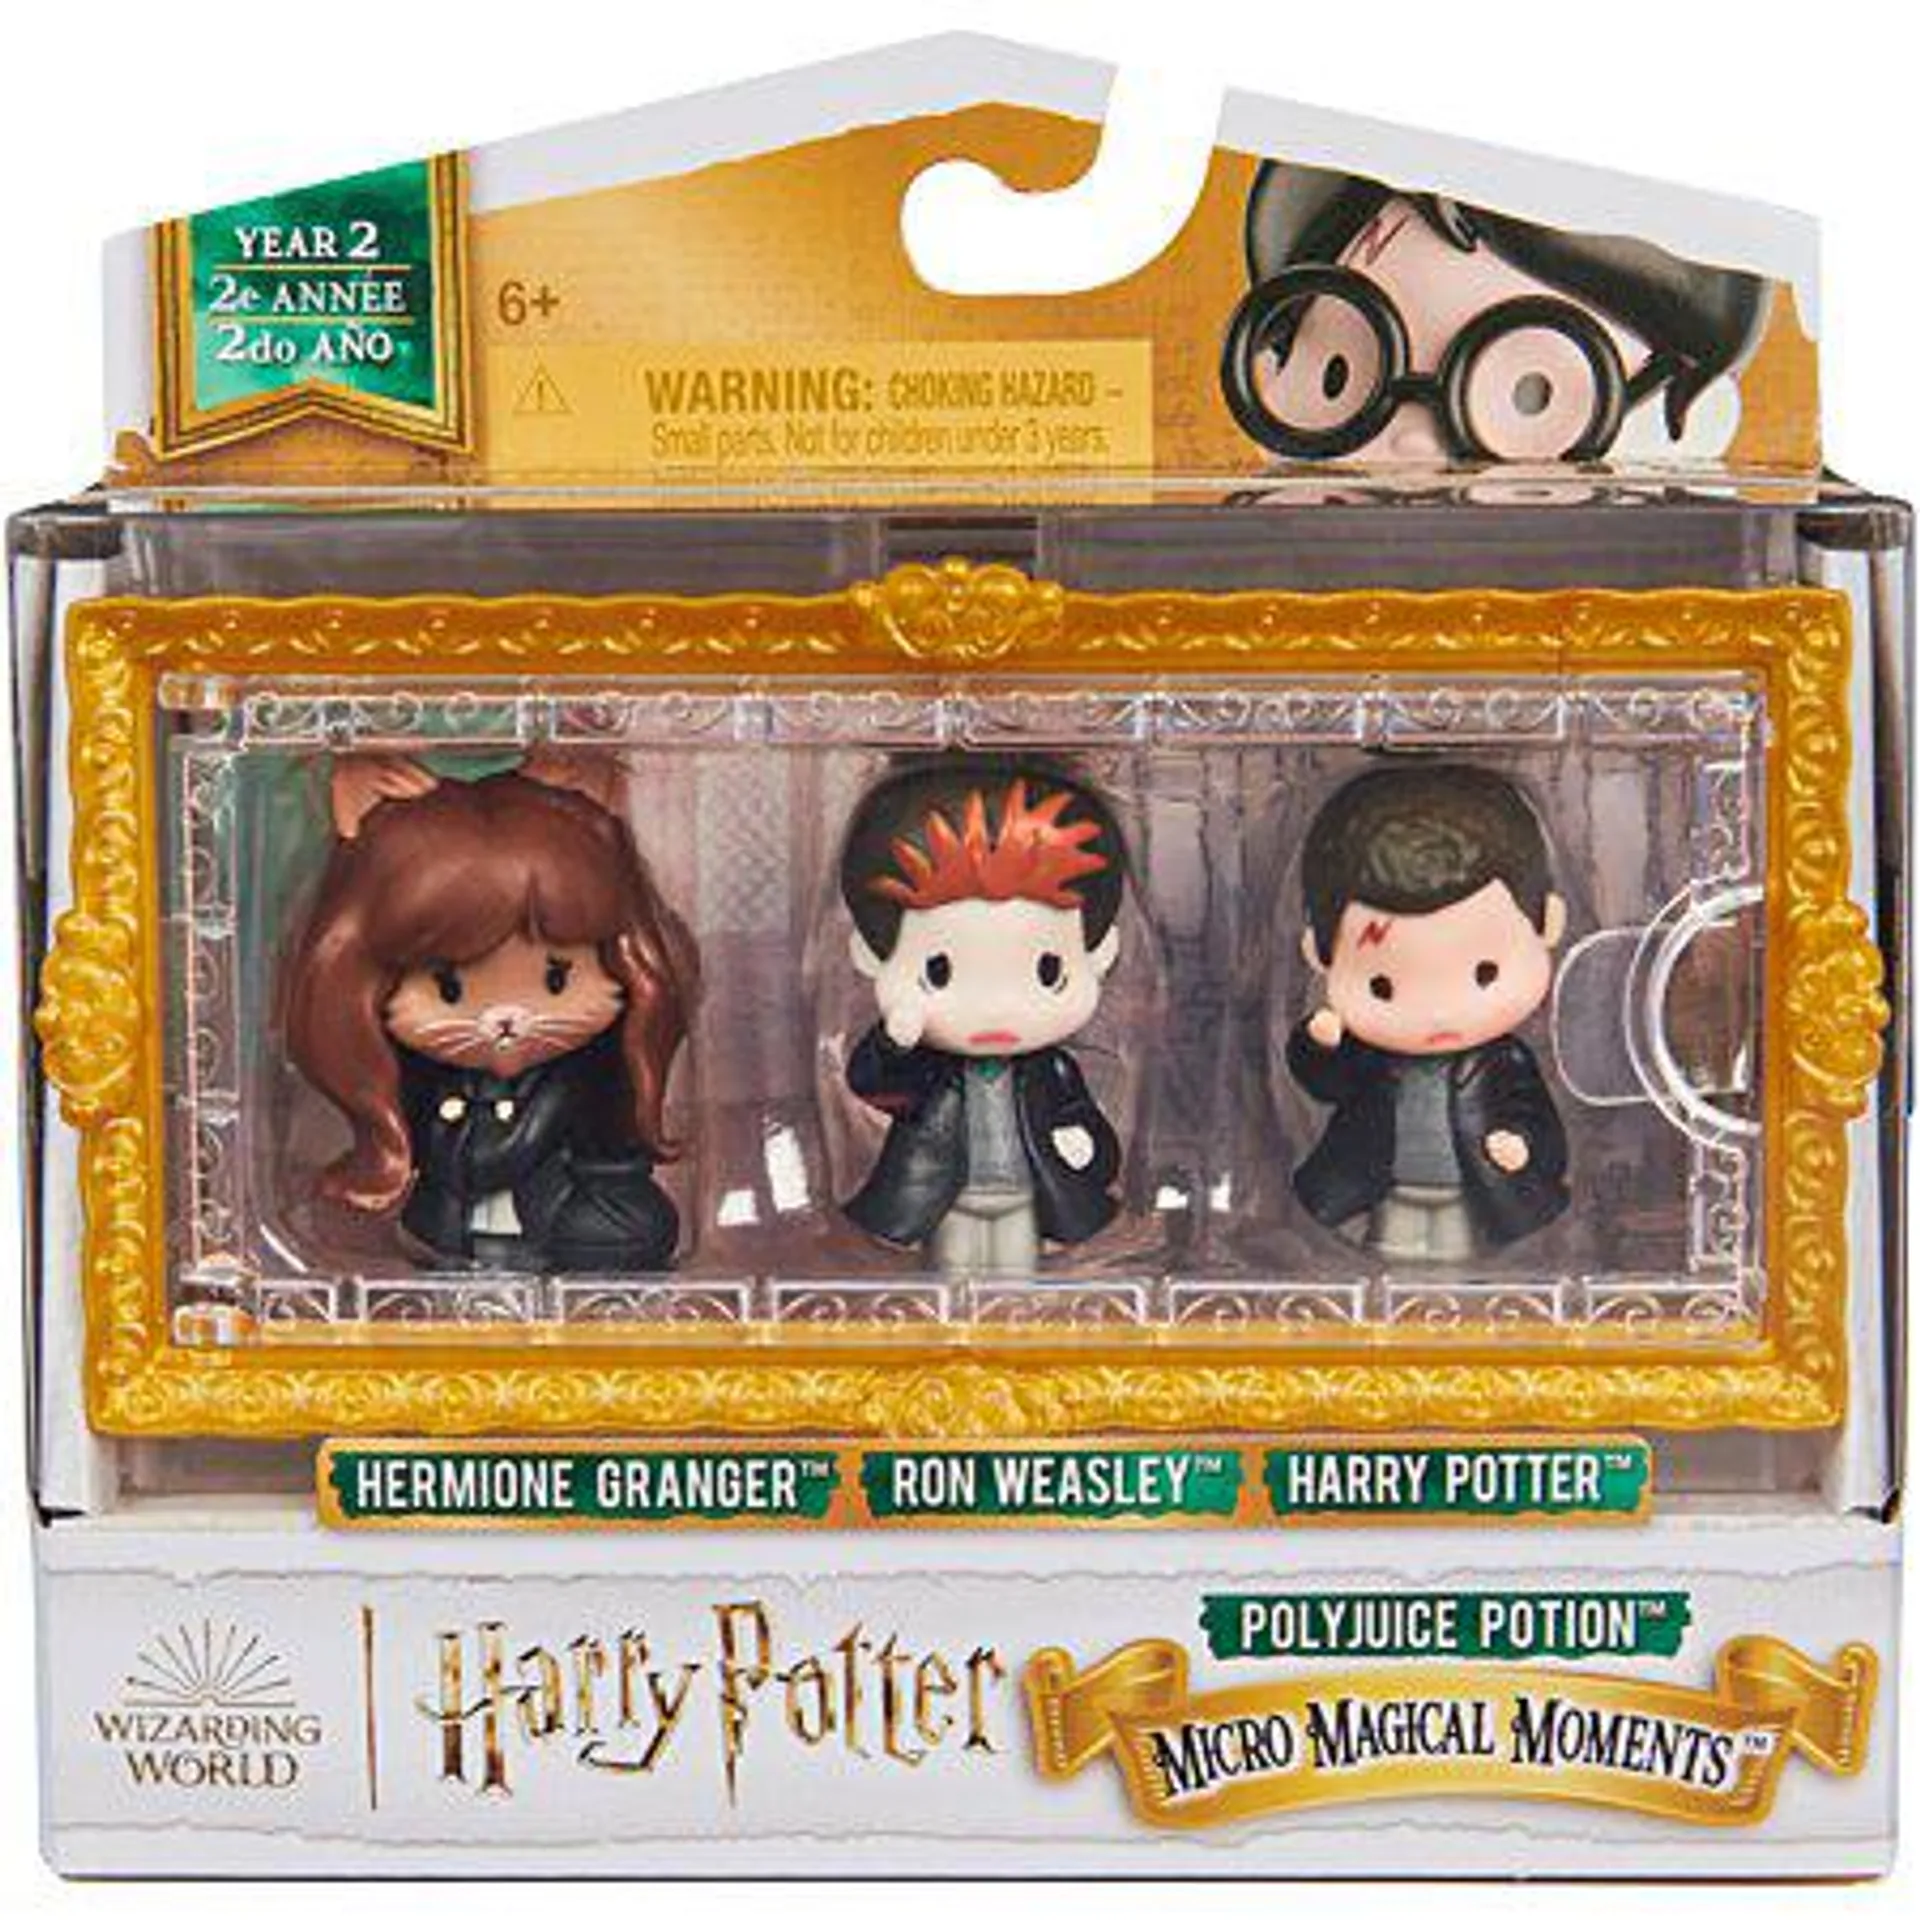 Multipack 3 figurines polynectar moments magiques wizarding world